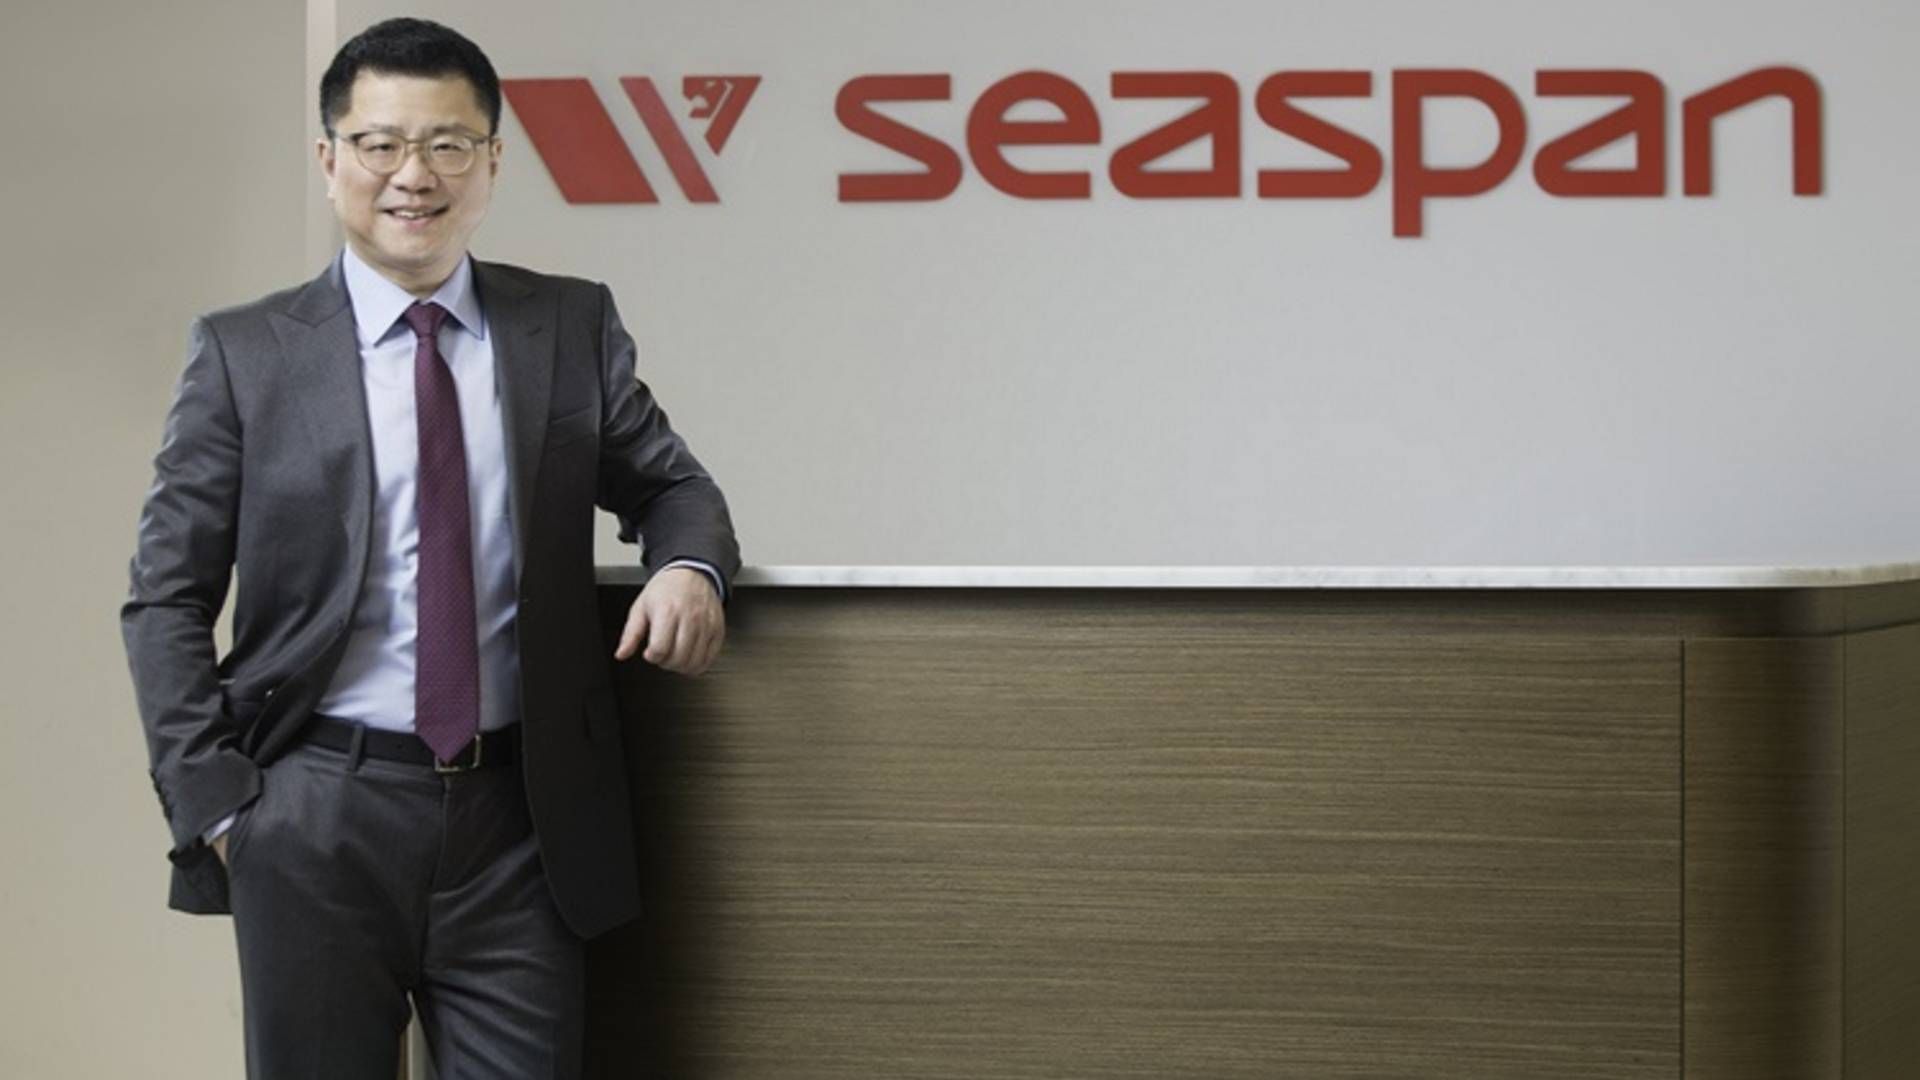 Bing Chen heads Seaspan which plans to raise million for new acquisitions. | Photo: PR/Seaspan